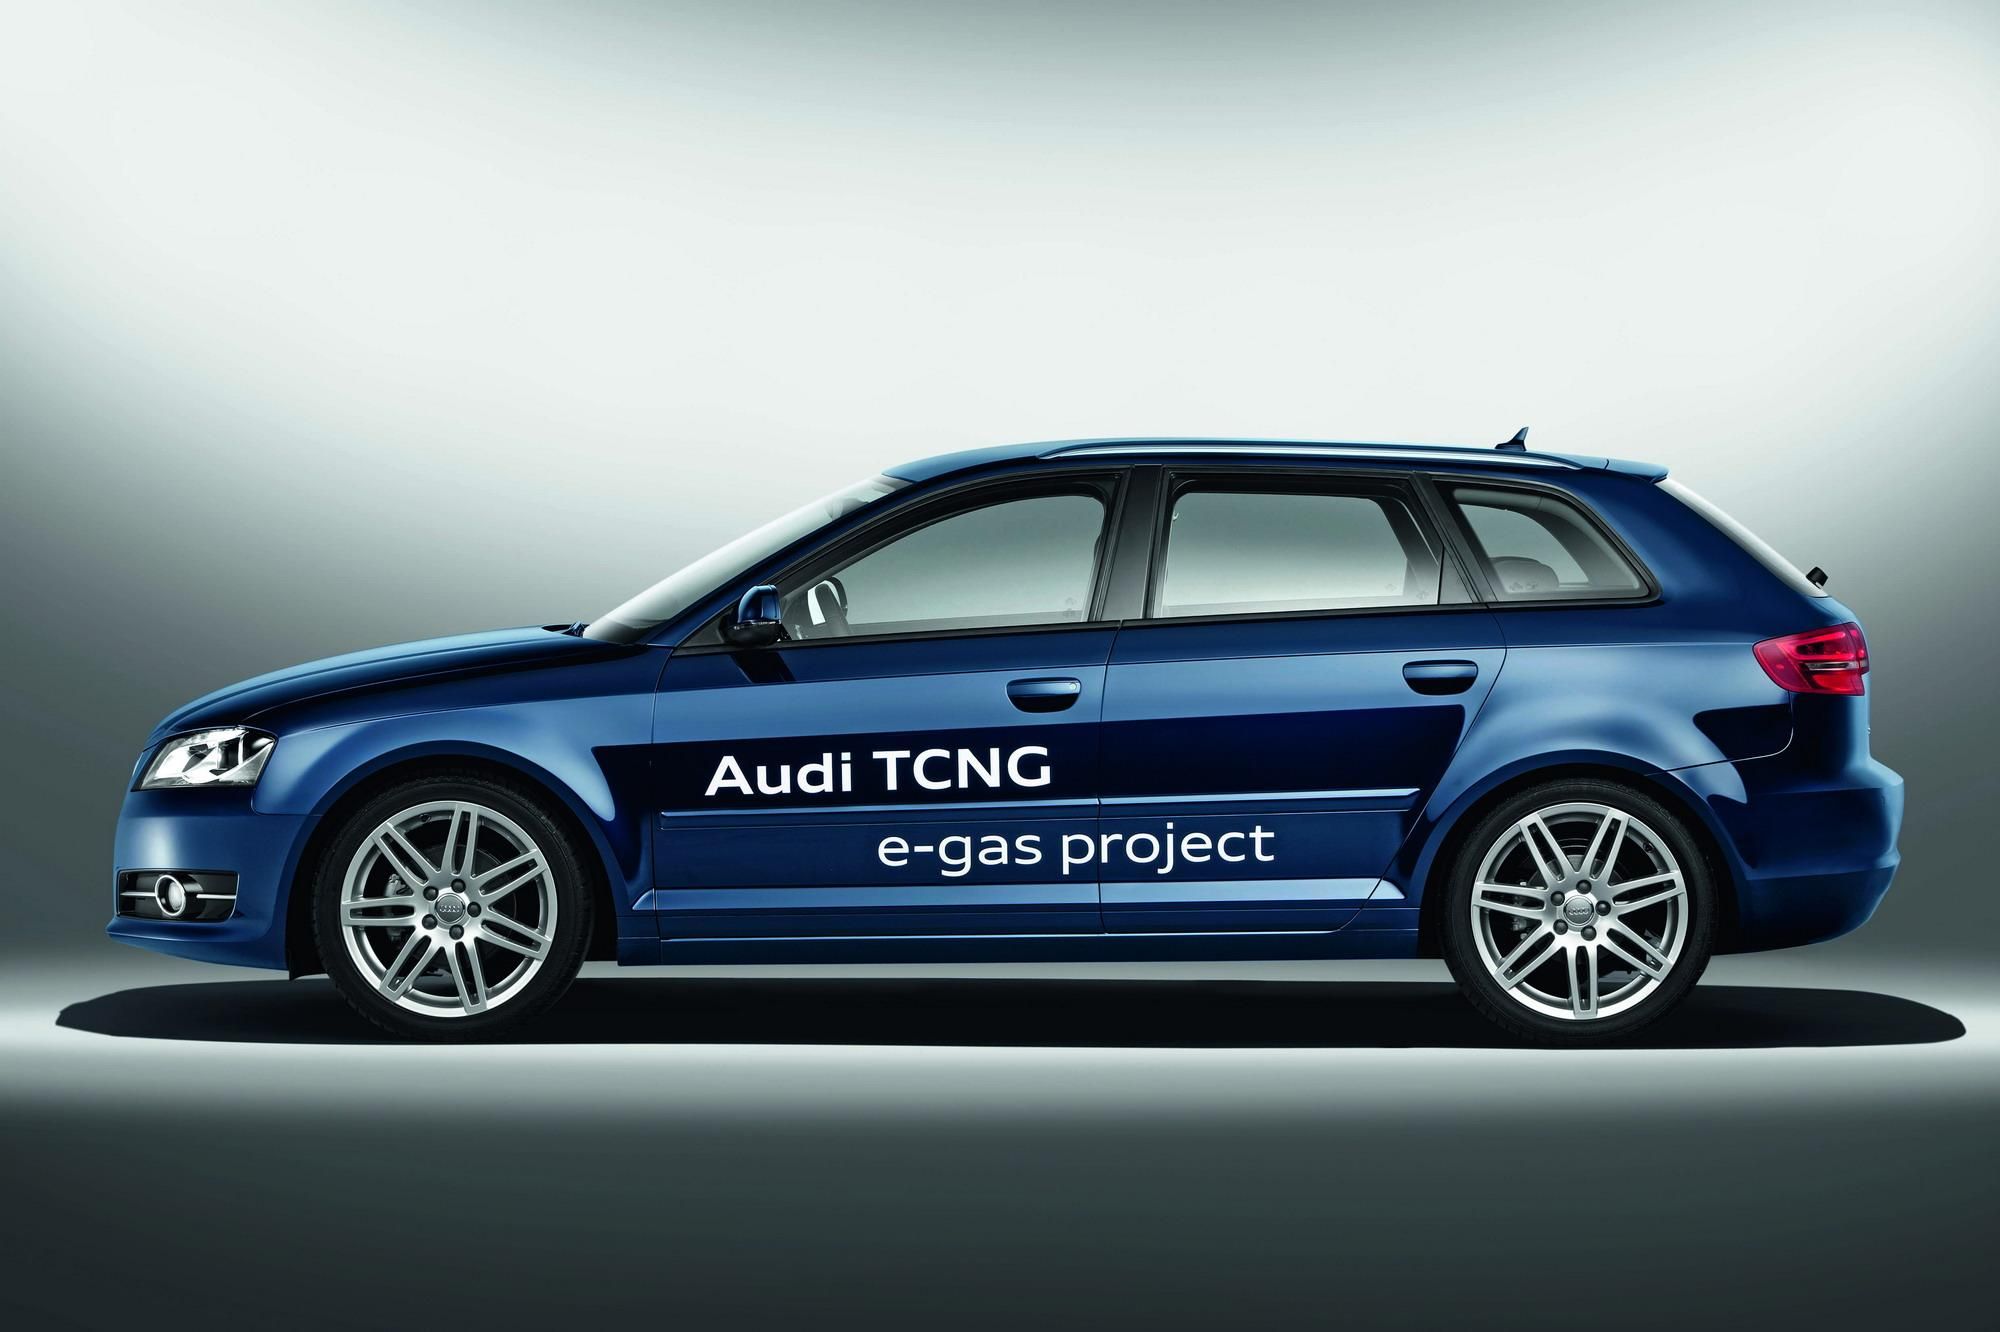 2011 Audi TCNG e-gas project